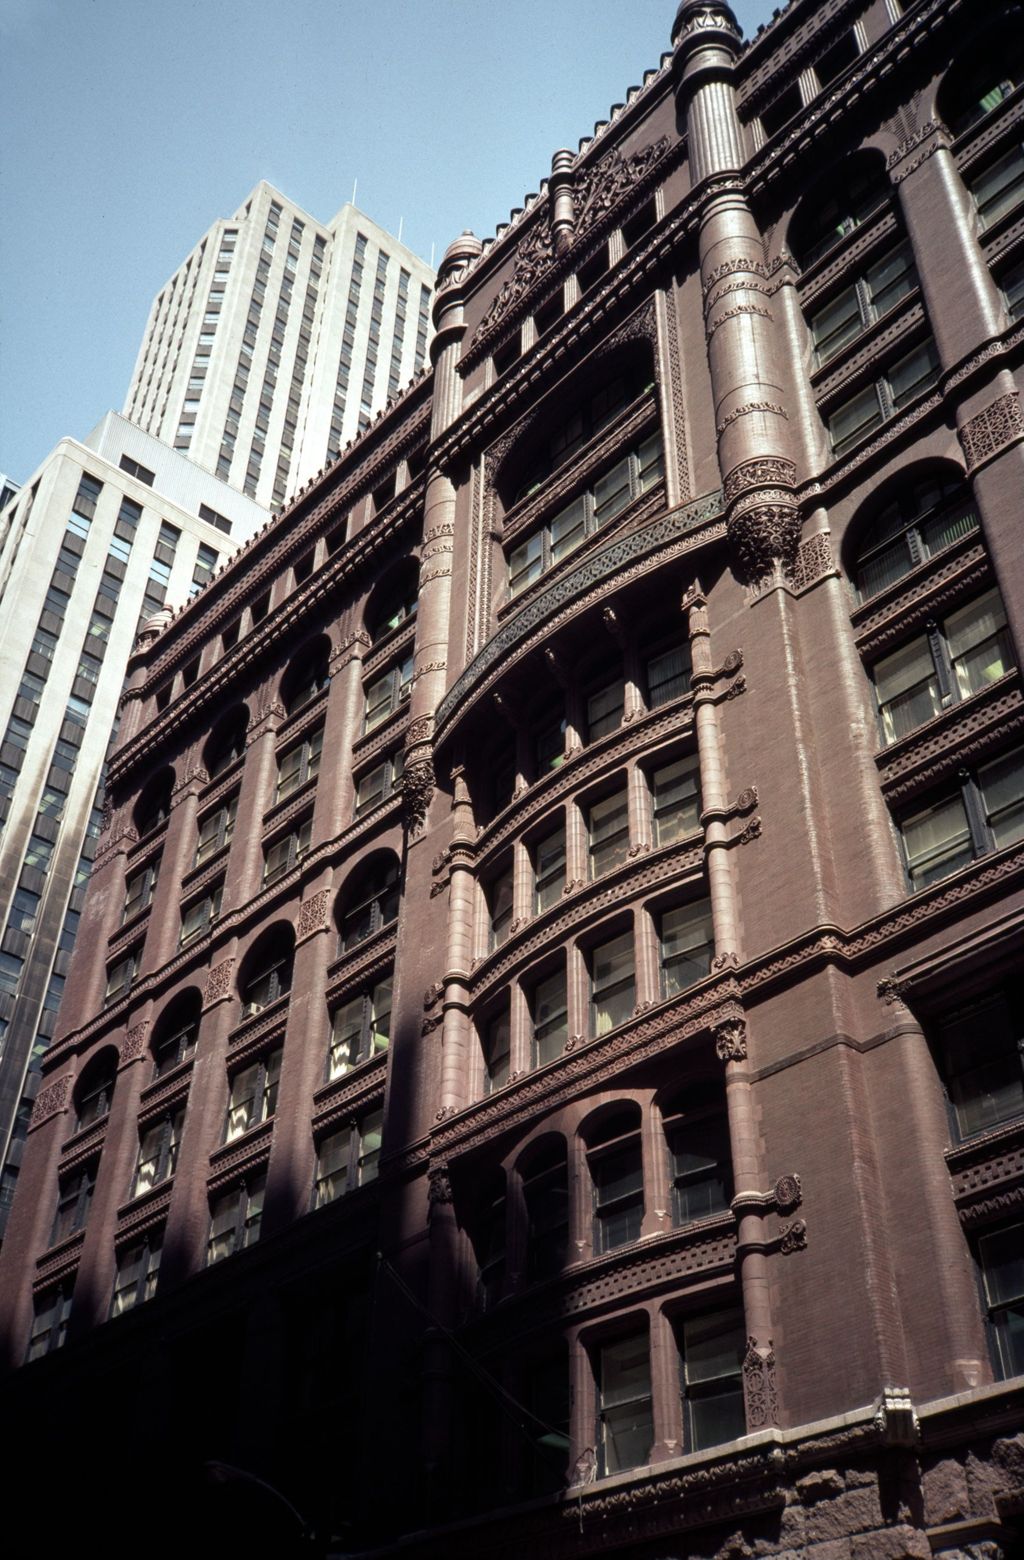 Miniature of Rookery Building